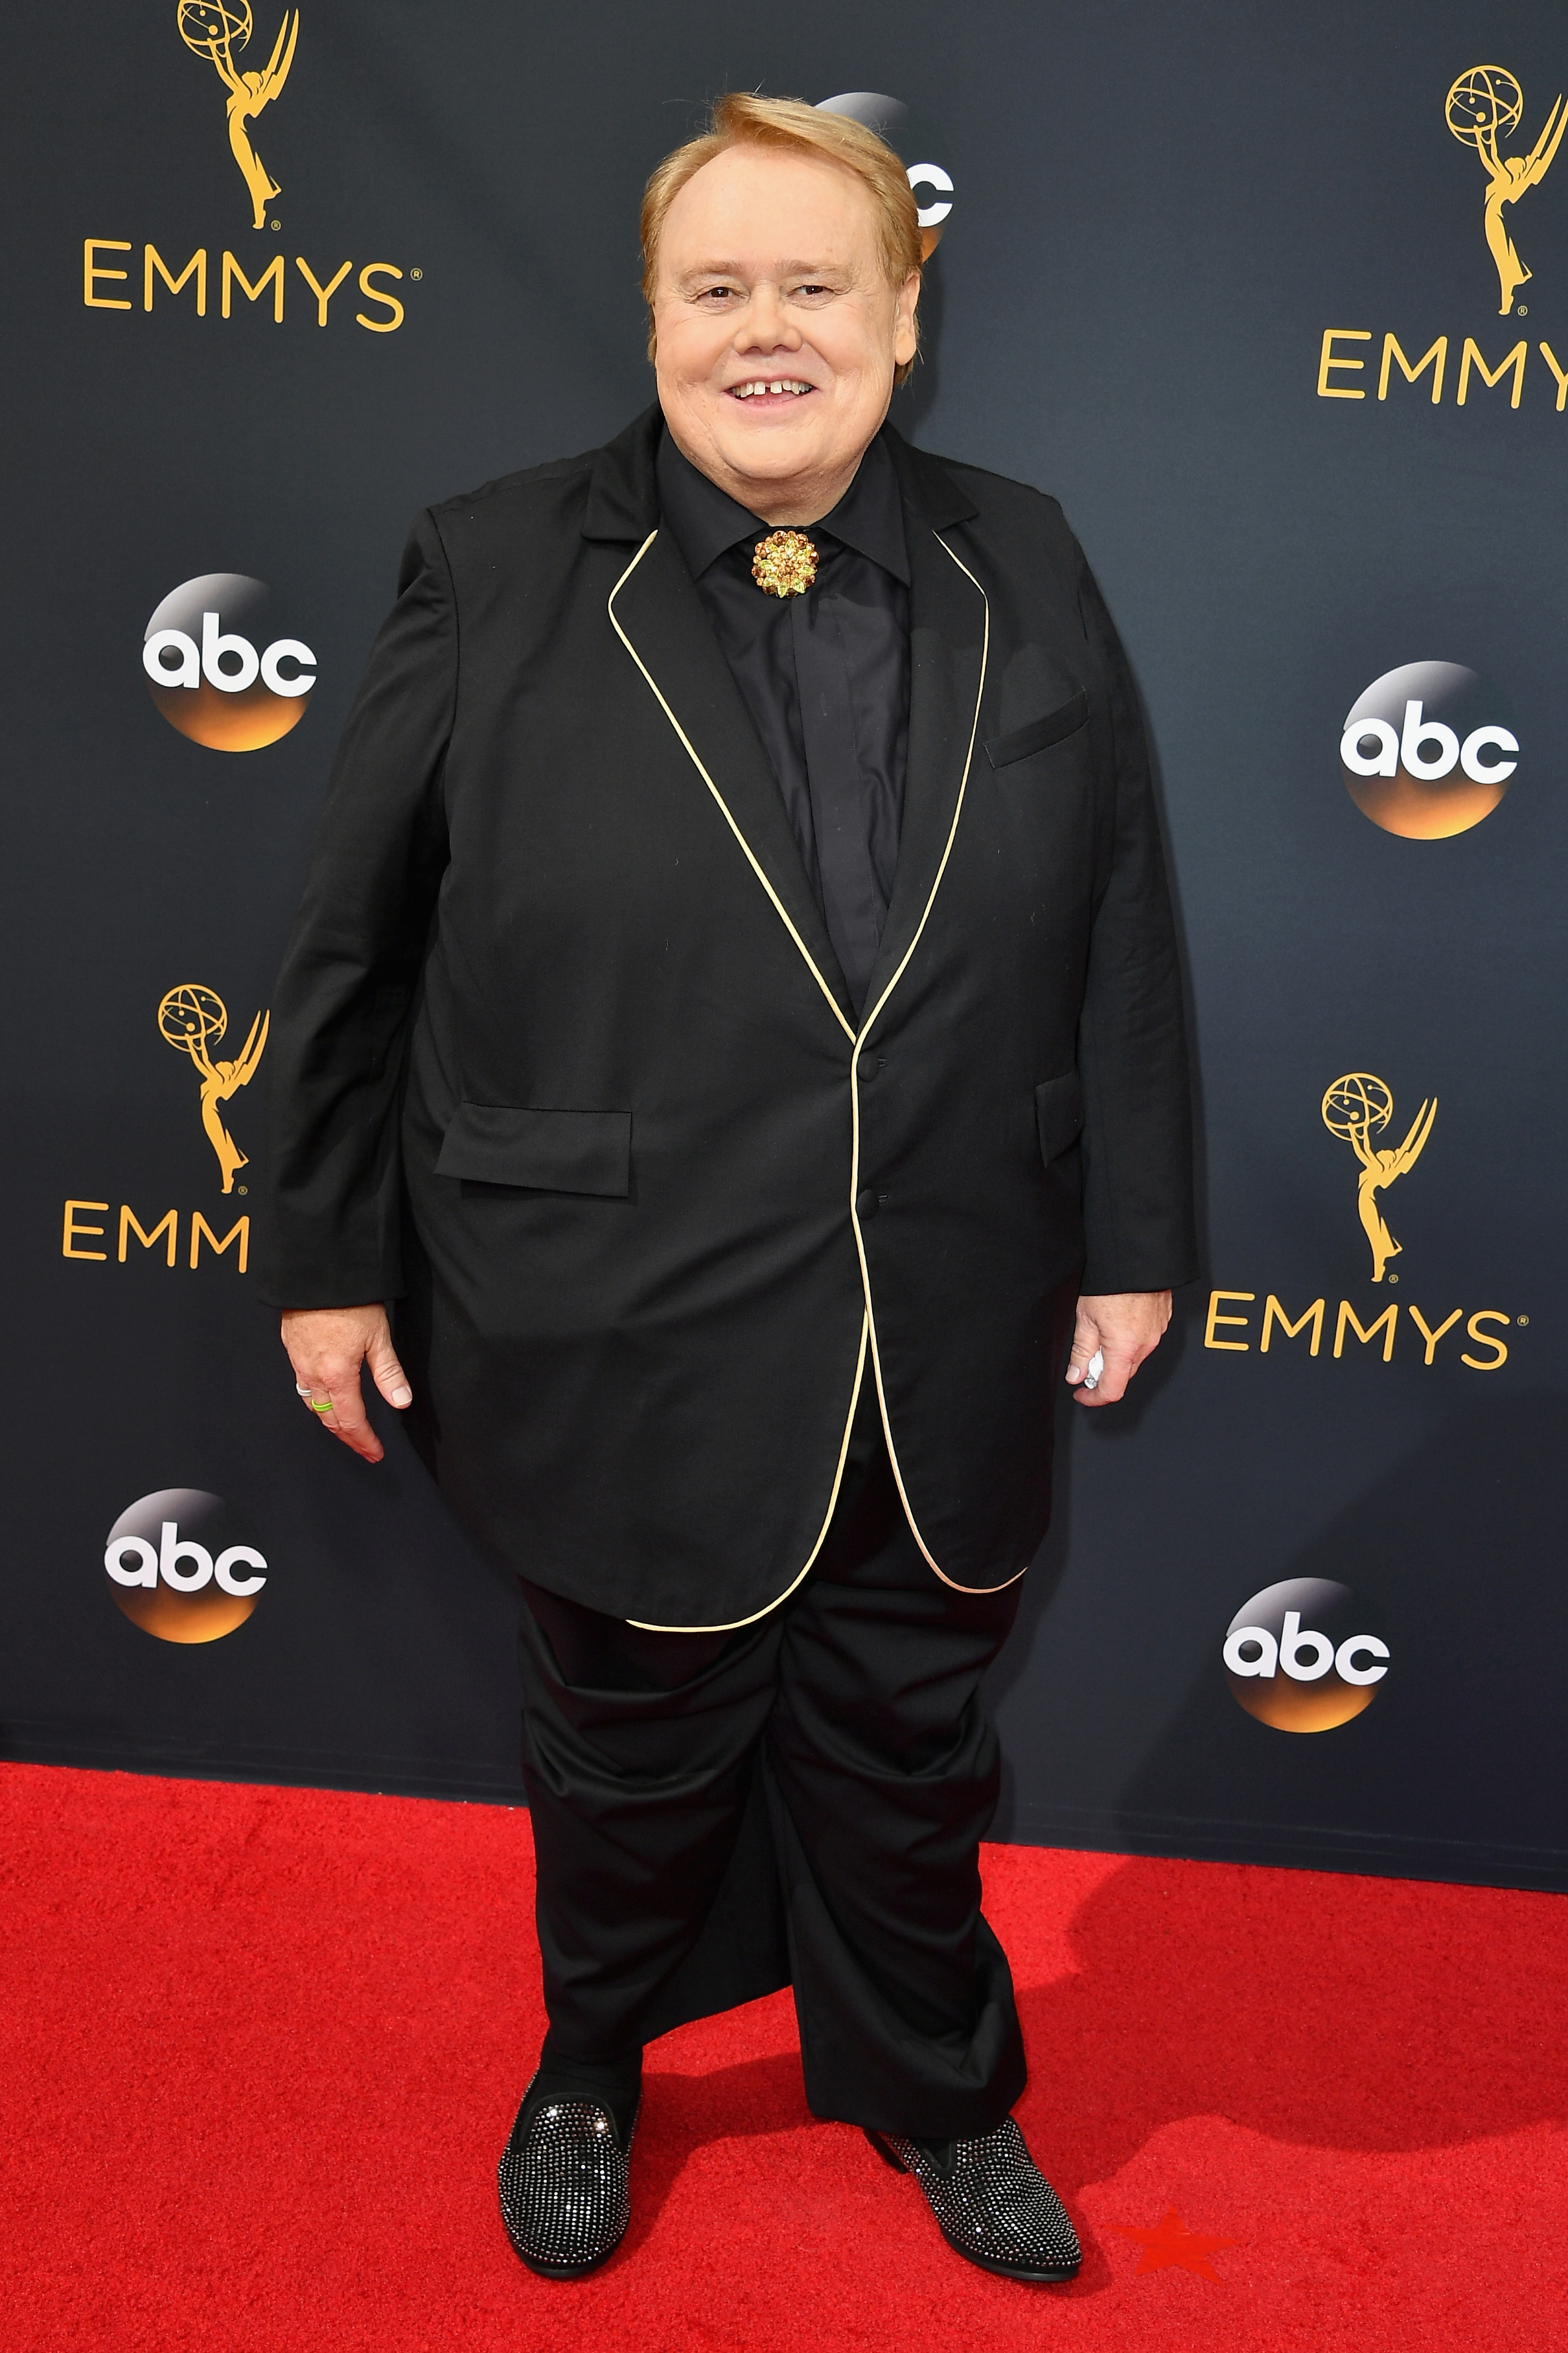 Louie Anderson arrives at the 68th Annual Primetime Emmy Awards at Microsoft Theater on Sept. 18, 2016 in Los Angeles.